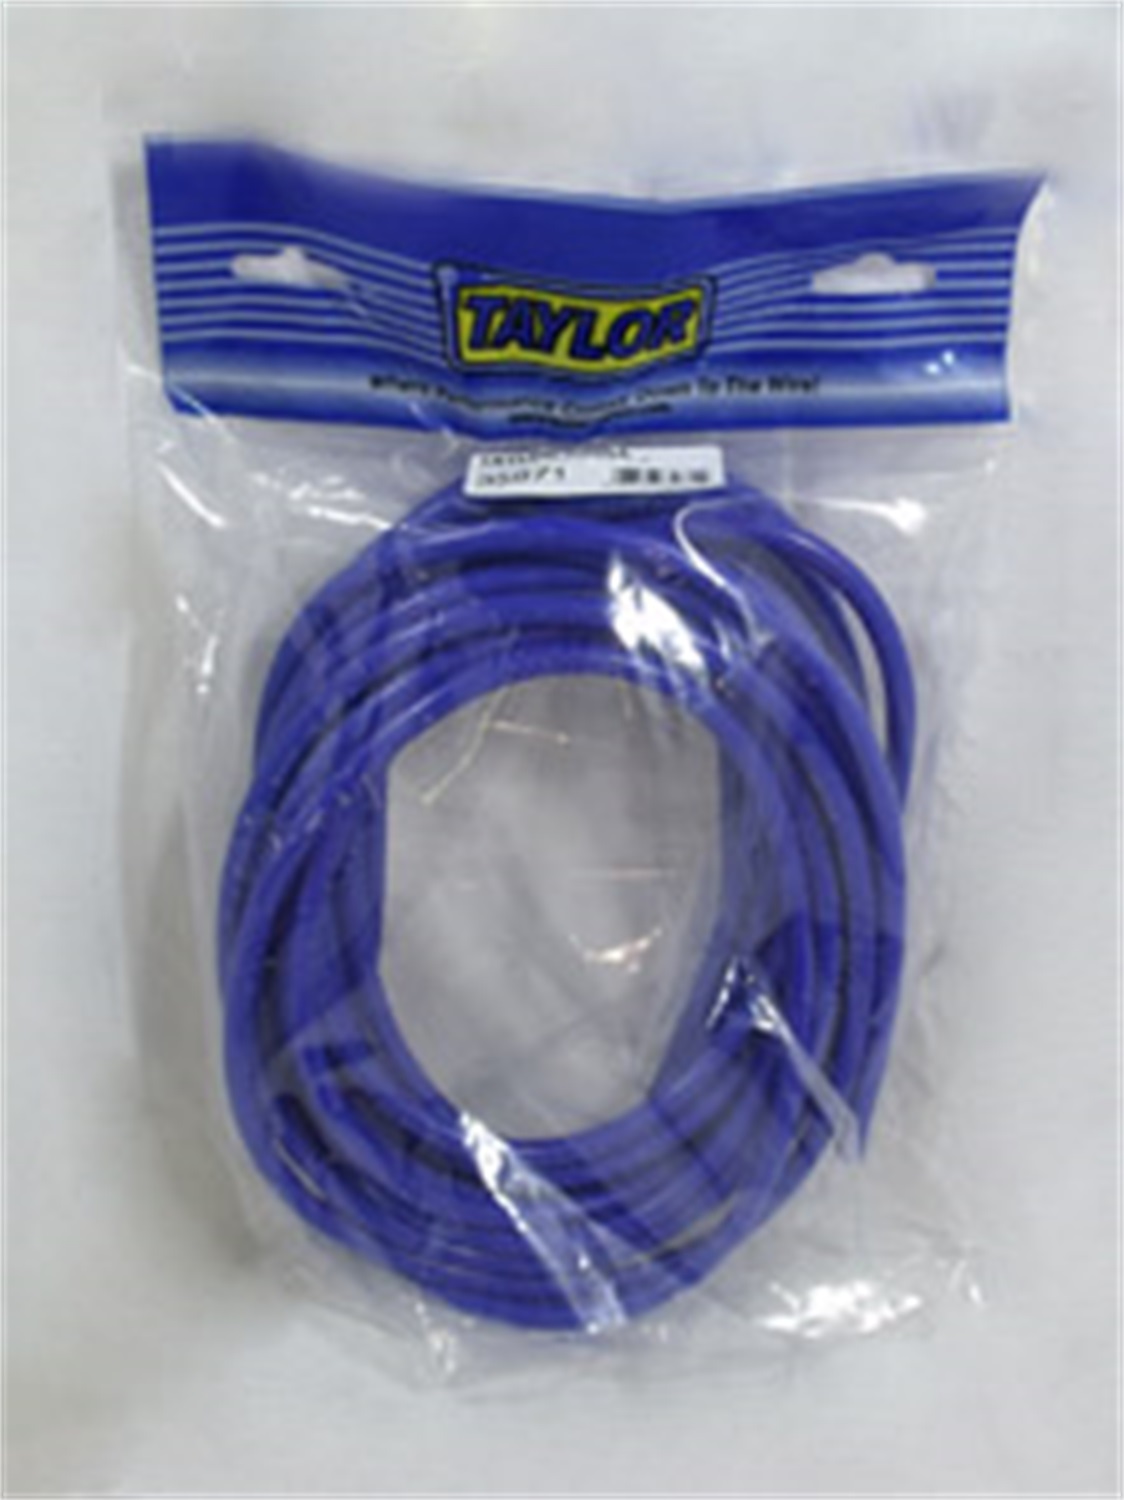 Taylor Cable Taylor Cable 35671 8mm Spiro Wound; Ignition Wire